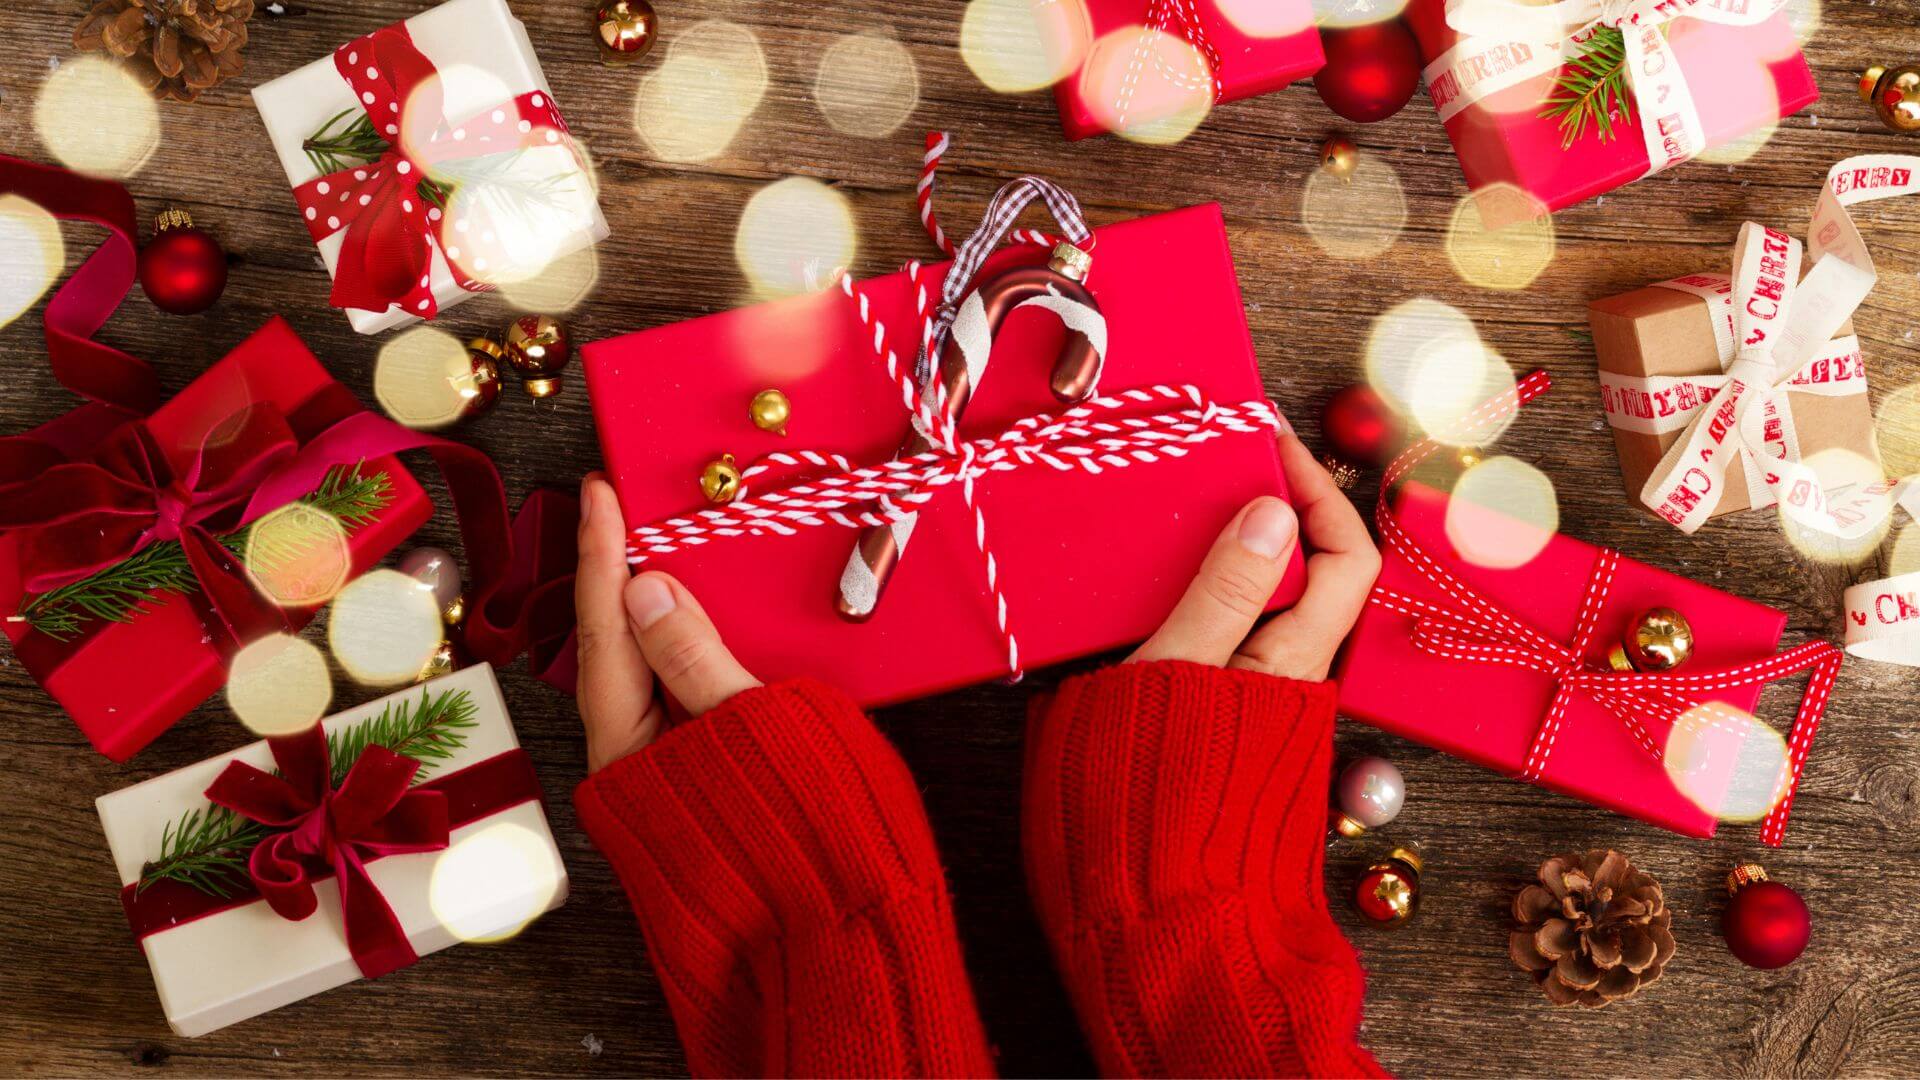 Hands holding Christmas Gifts in Red Wrapping 